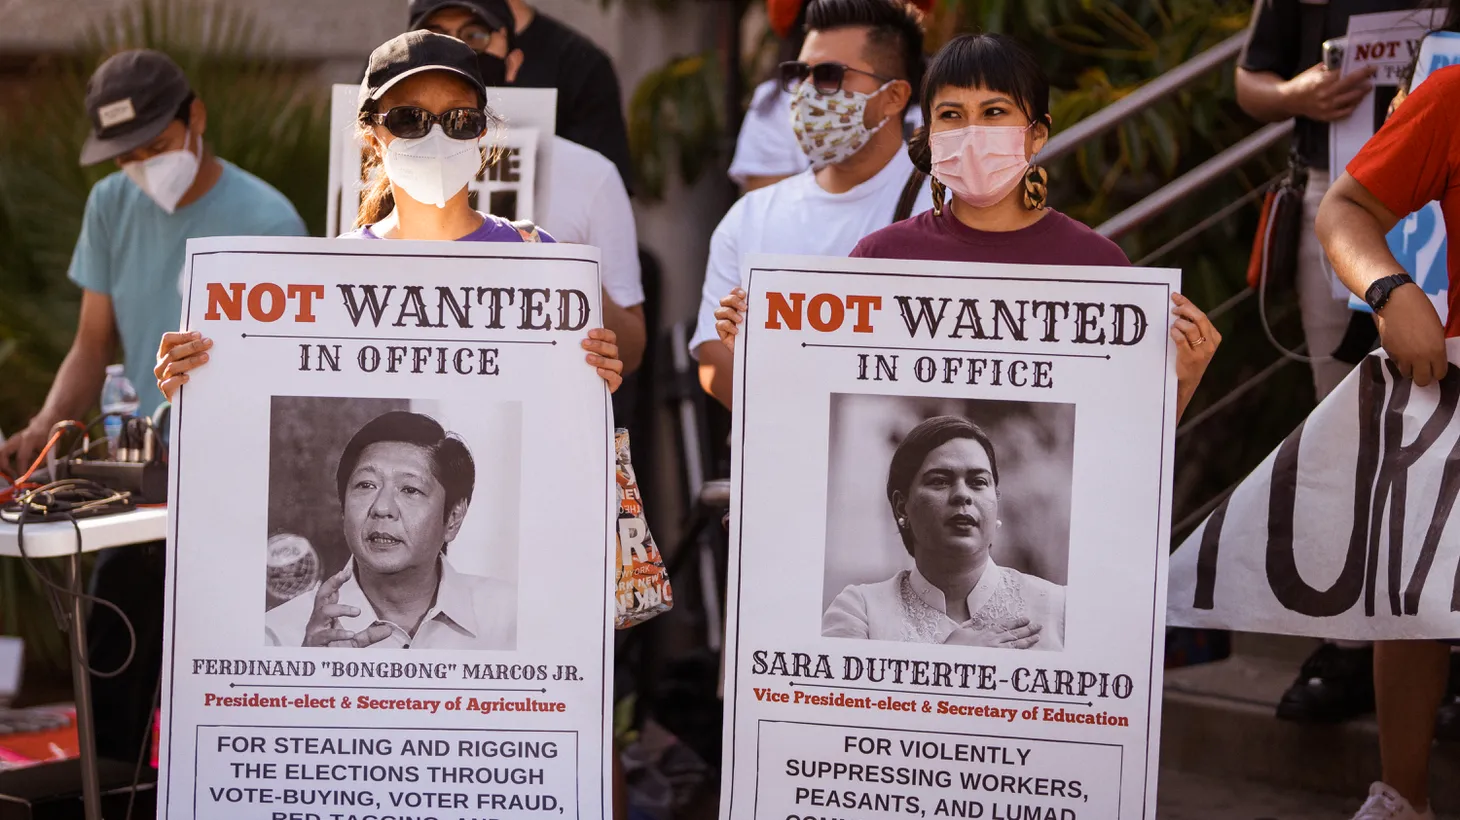 Activists hold “not wanted in office” posters of Ferdinand "Bongbong" Romualdez Marcos Jr. and Sara Duterte-Carpio outside the Philippine Consulate on Wilshire Blvd. on July 24, 2022.